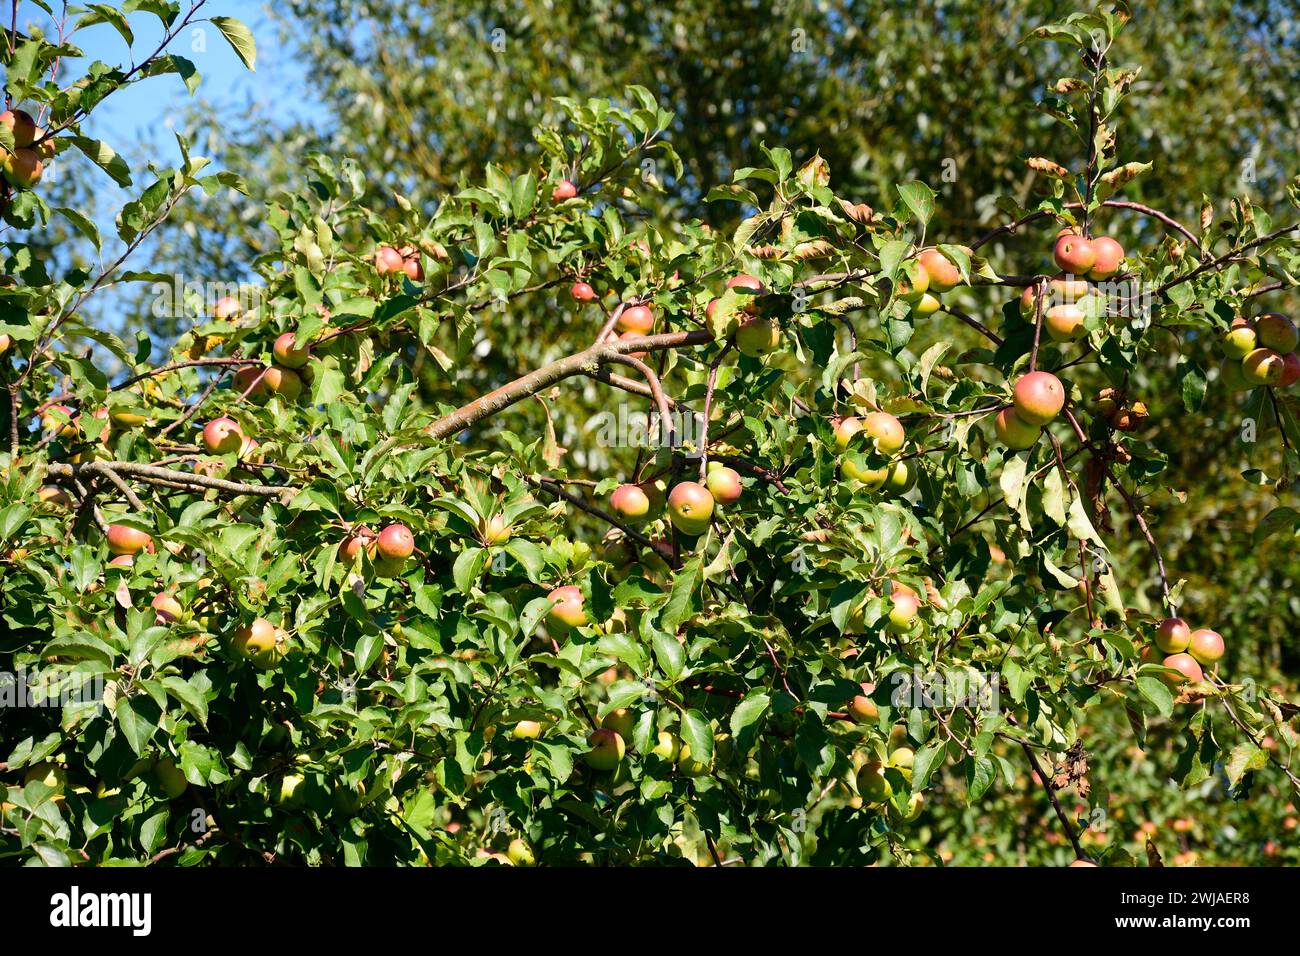 Fully laden ripe red apples on an orchard tree on the edge of town, Donyatt, Somerset, UK, Europe. Stock Photo